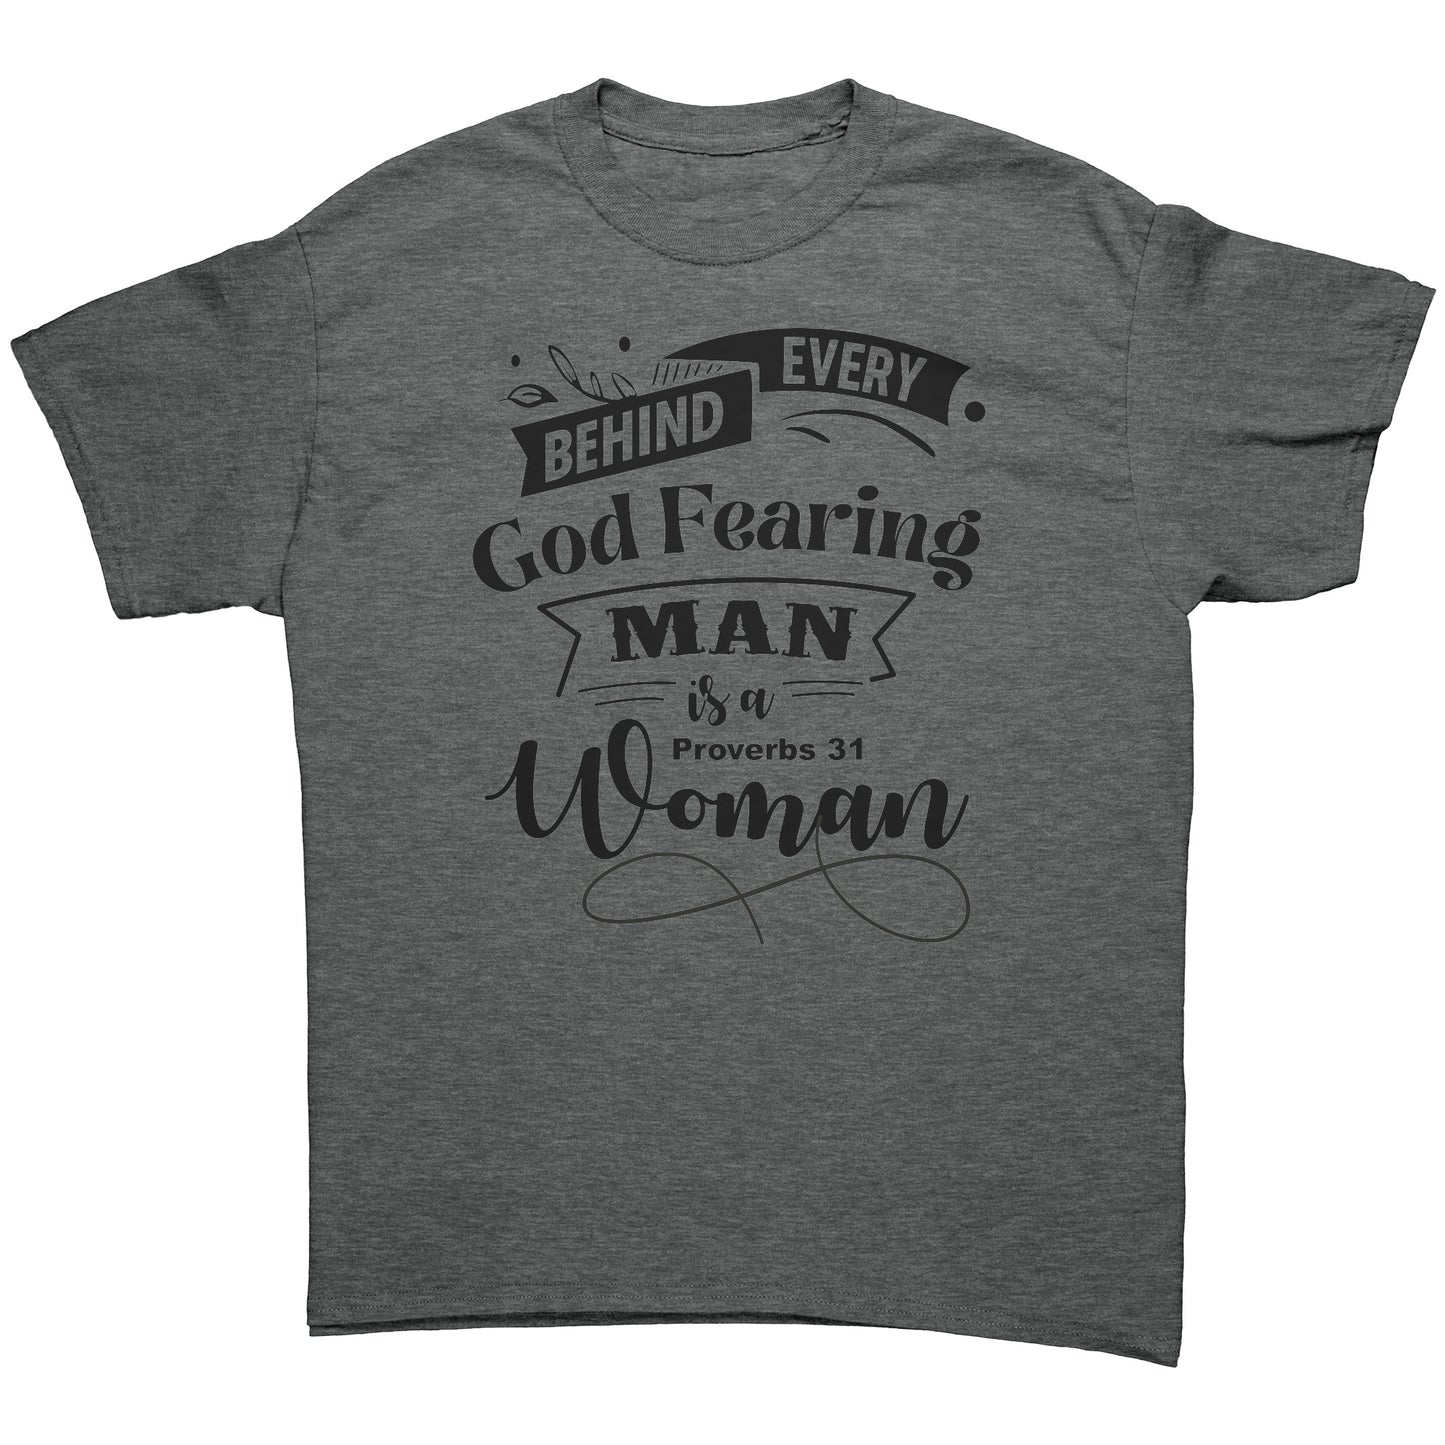 Behind Every God Fearing Man Is A Proverbs 31 Woman Men's T-Shirt Part 1